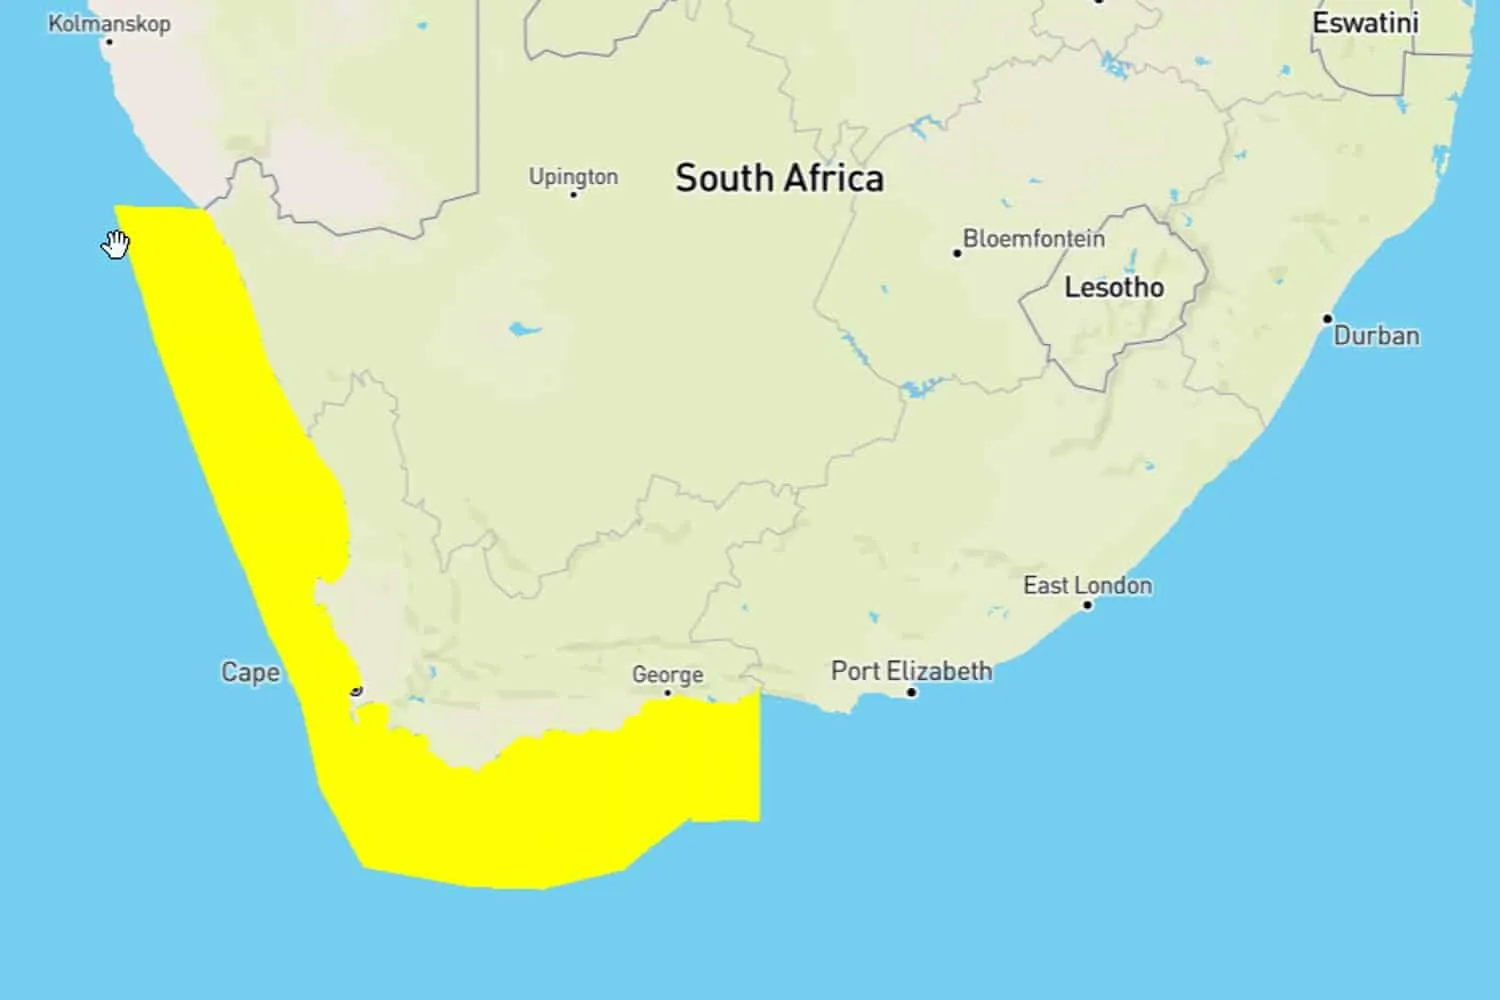 [WEATHER WARNING]: Damaging Waves for the Northern and Western Cape